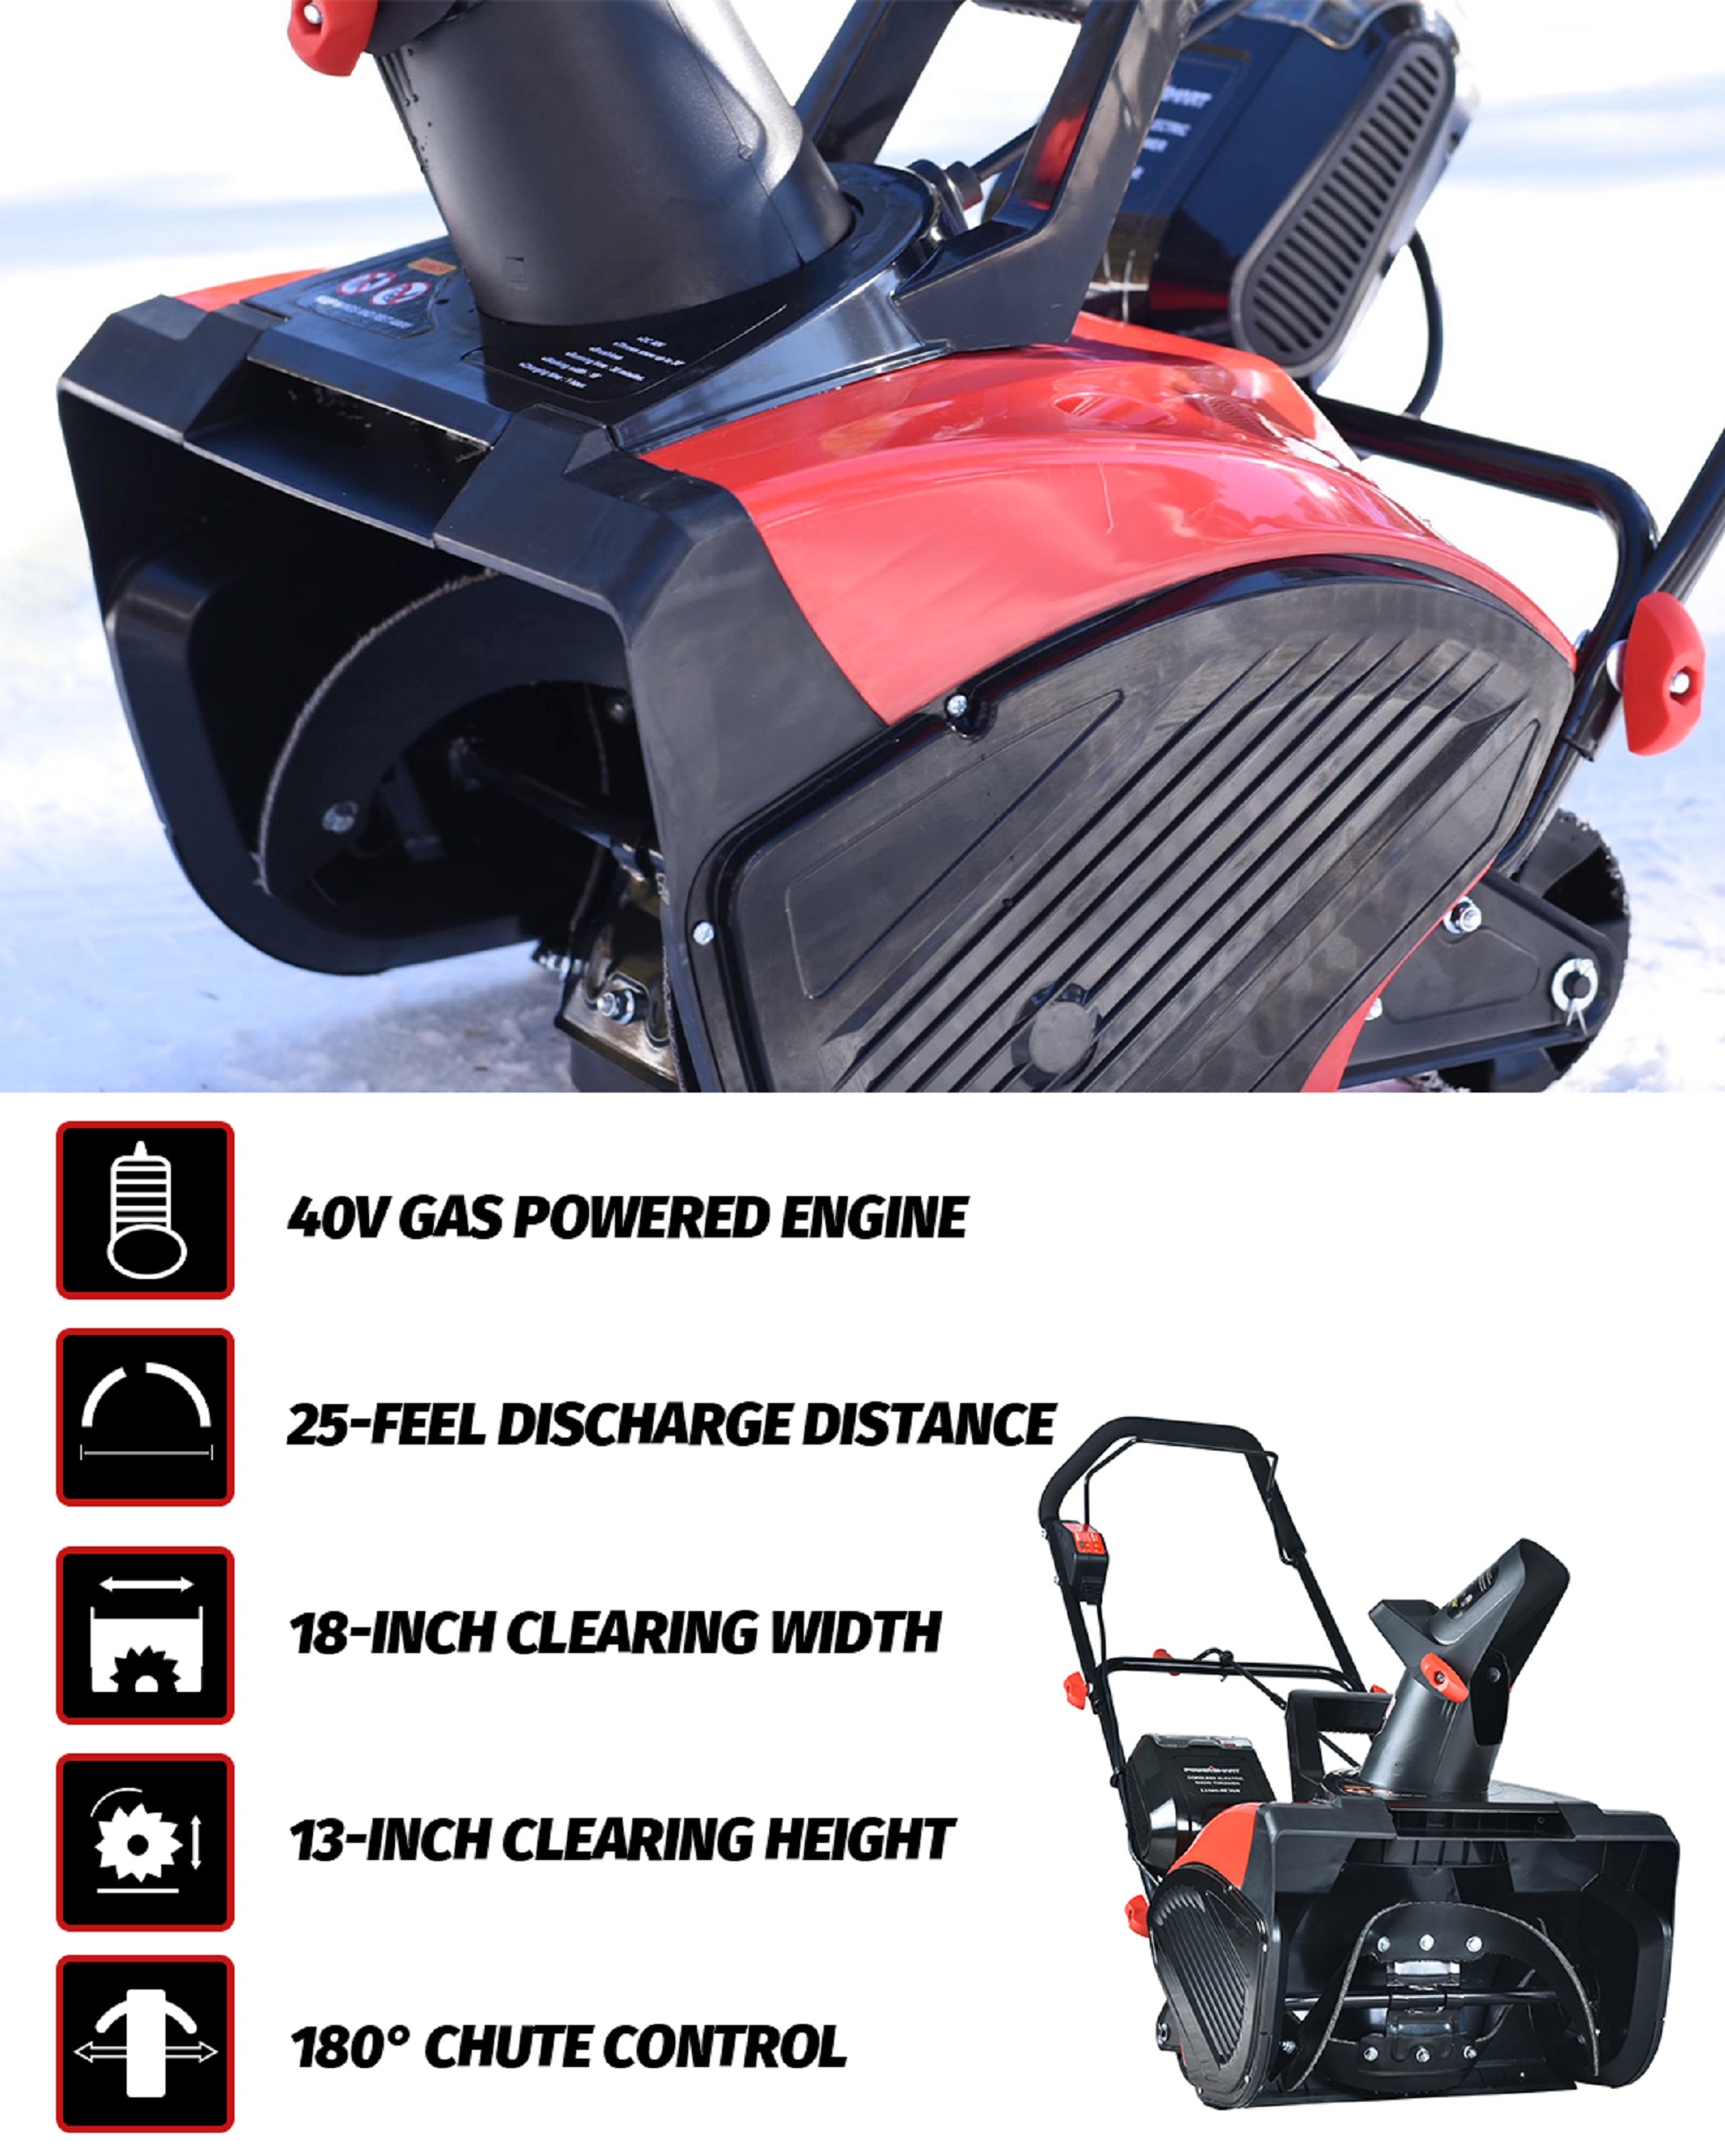 Powersmart 18 in. Cordless Lithium-Ion 40 Volt Snow Blower DB2401 - image 4 of 12